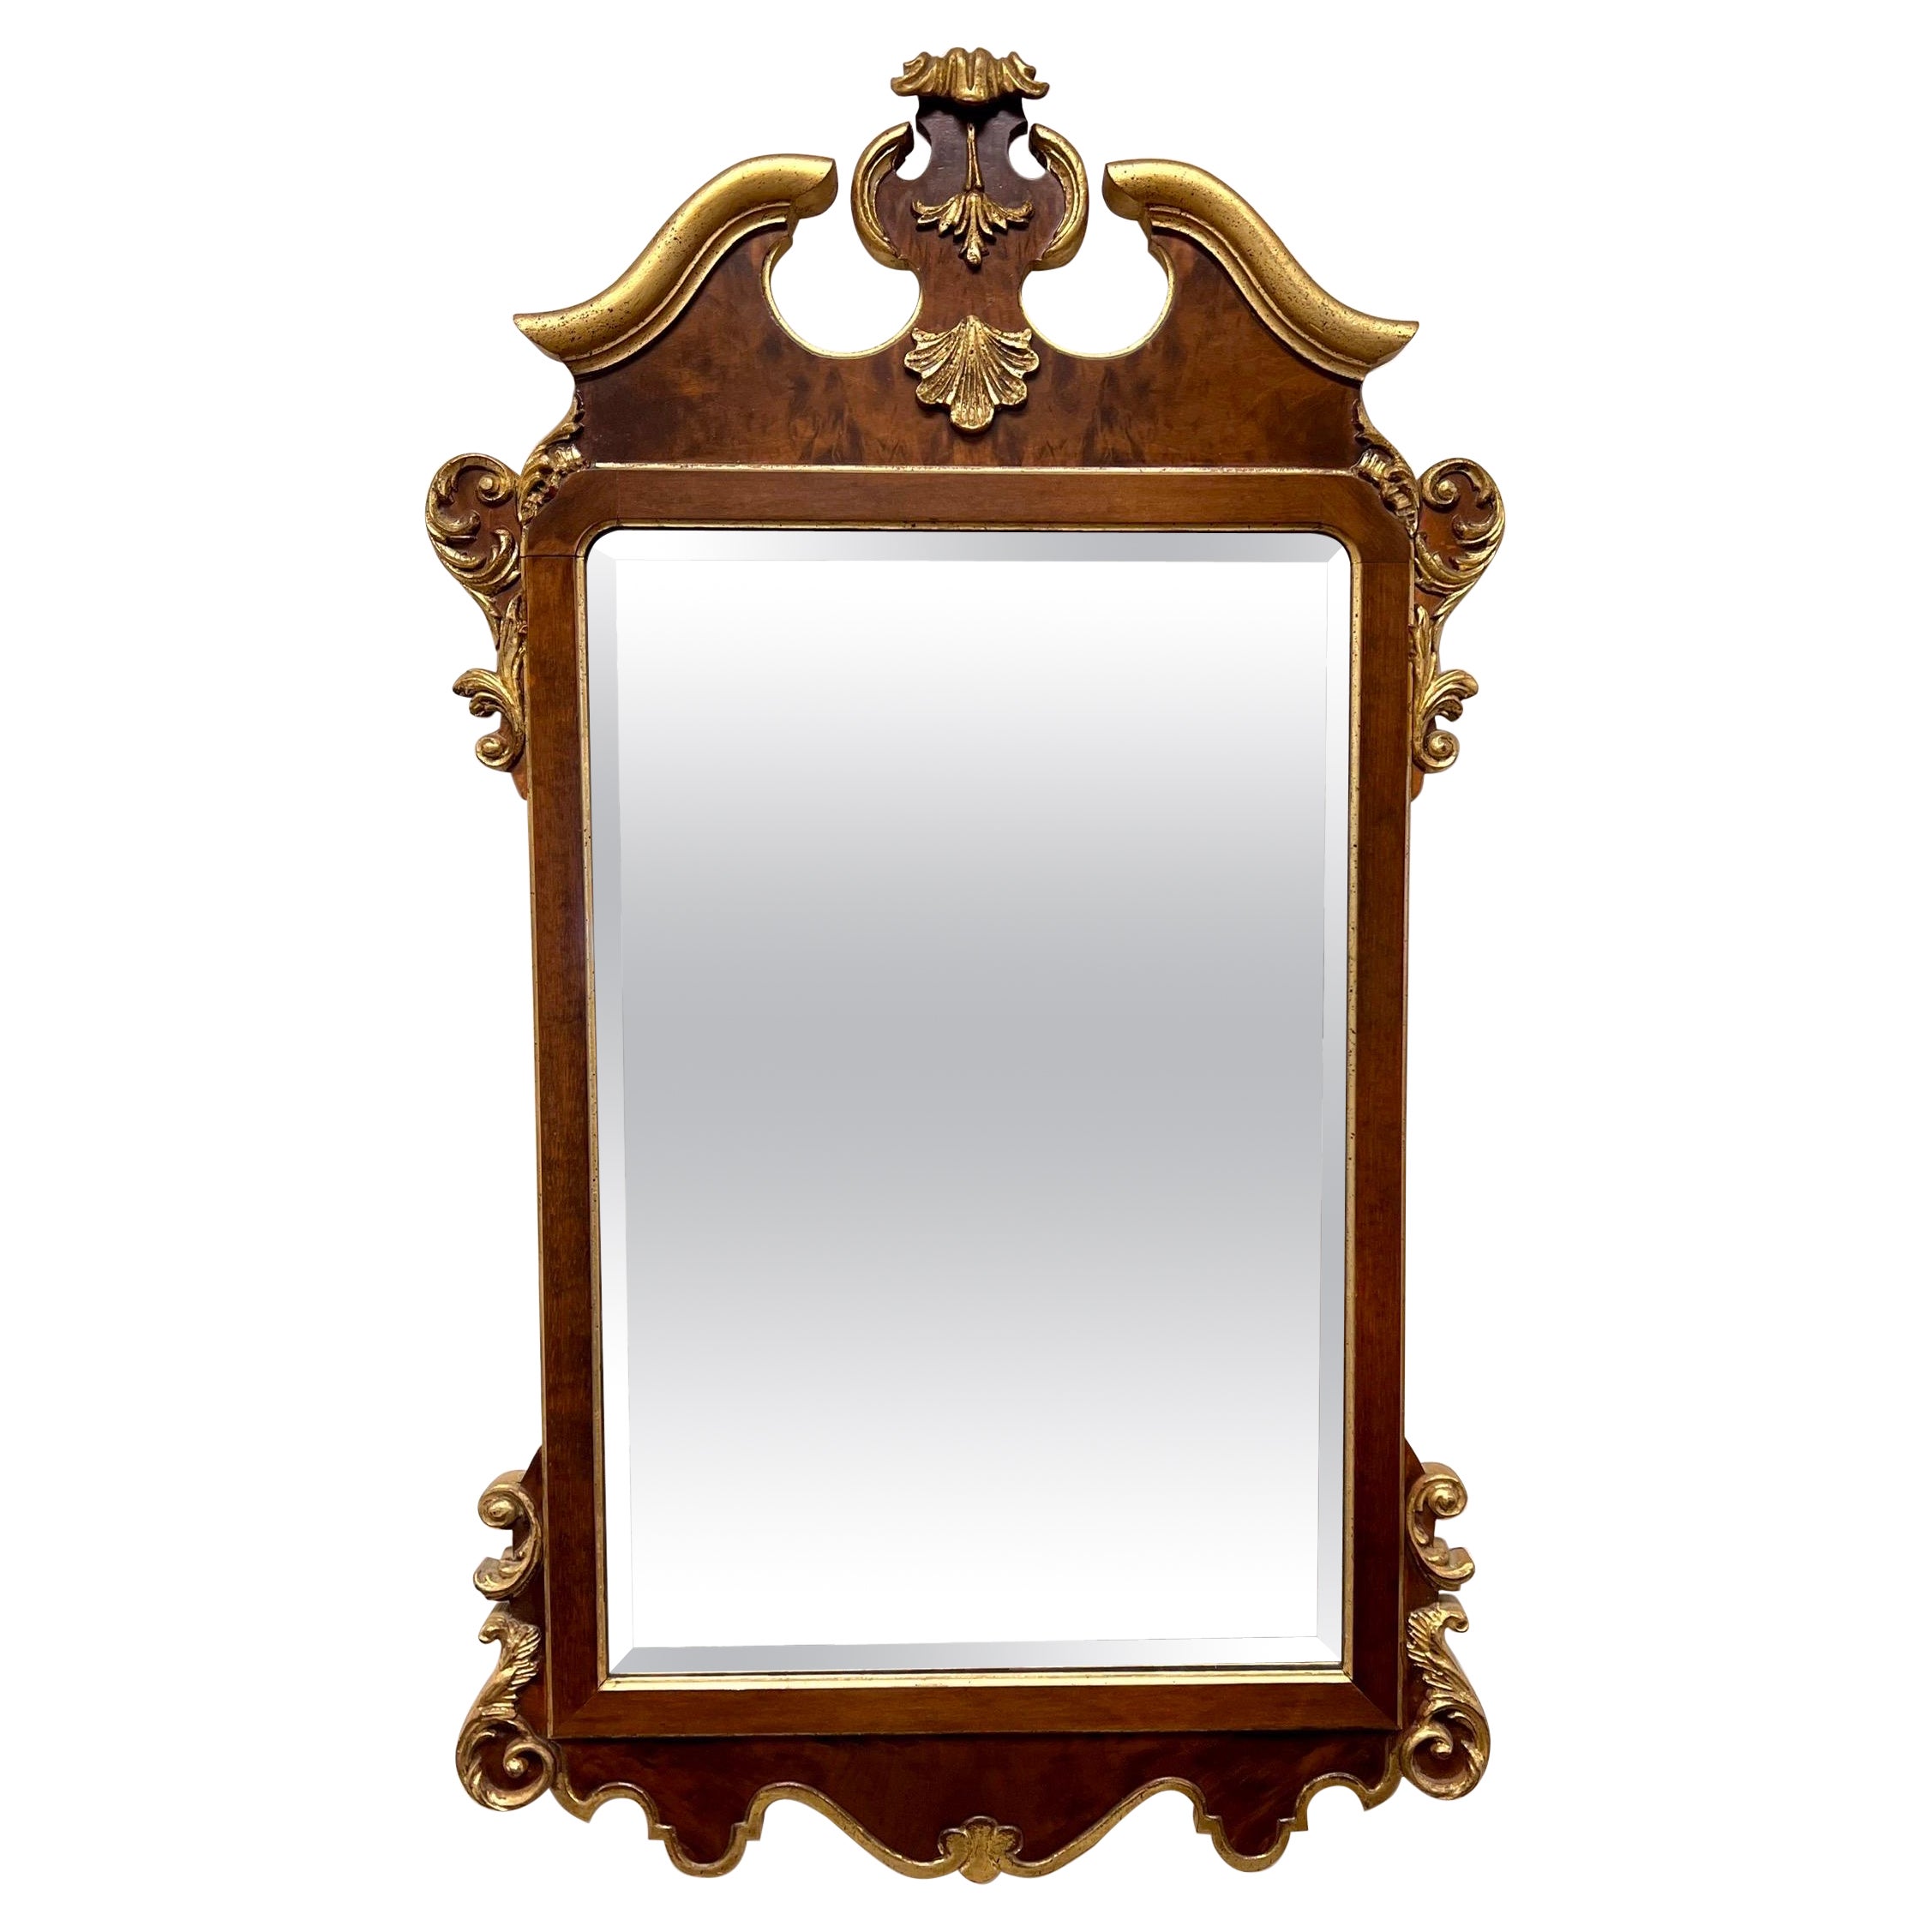 LaBarge Italian Carved Burled Walnut and Giltwood Wall Mirror